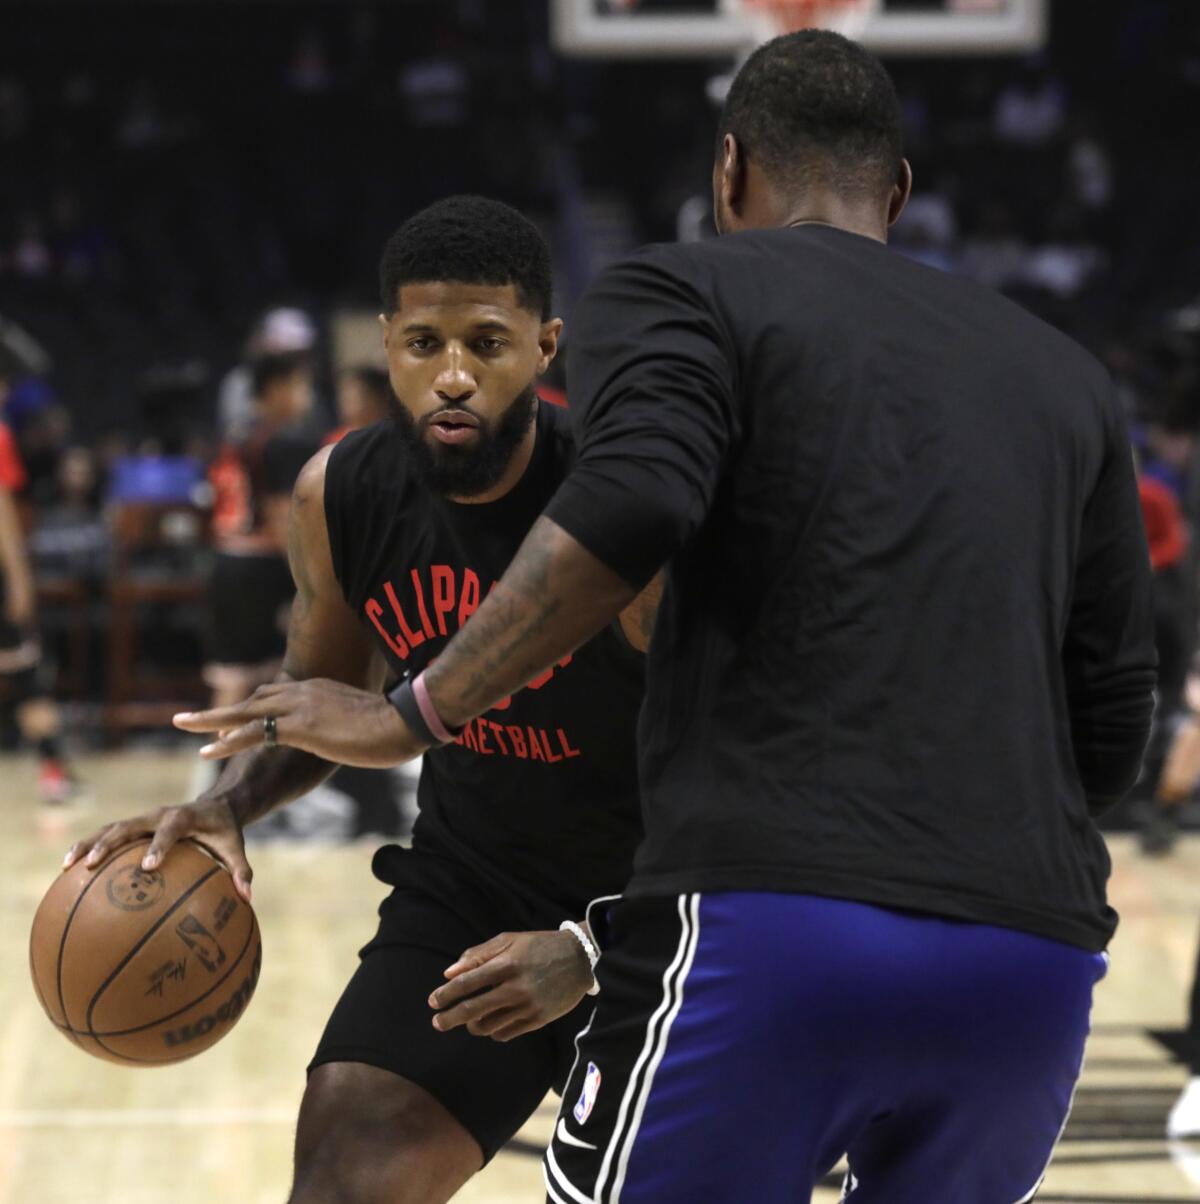 Clippers guard Paul George practices before Friday's game against the 76ers.